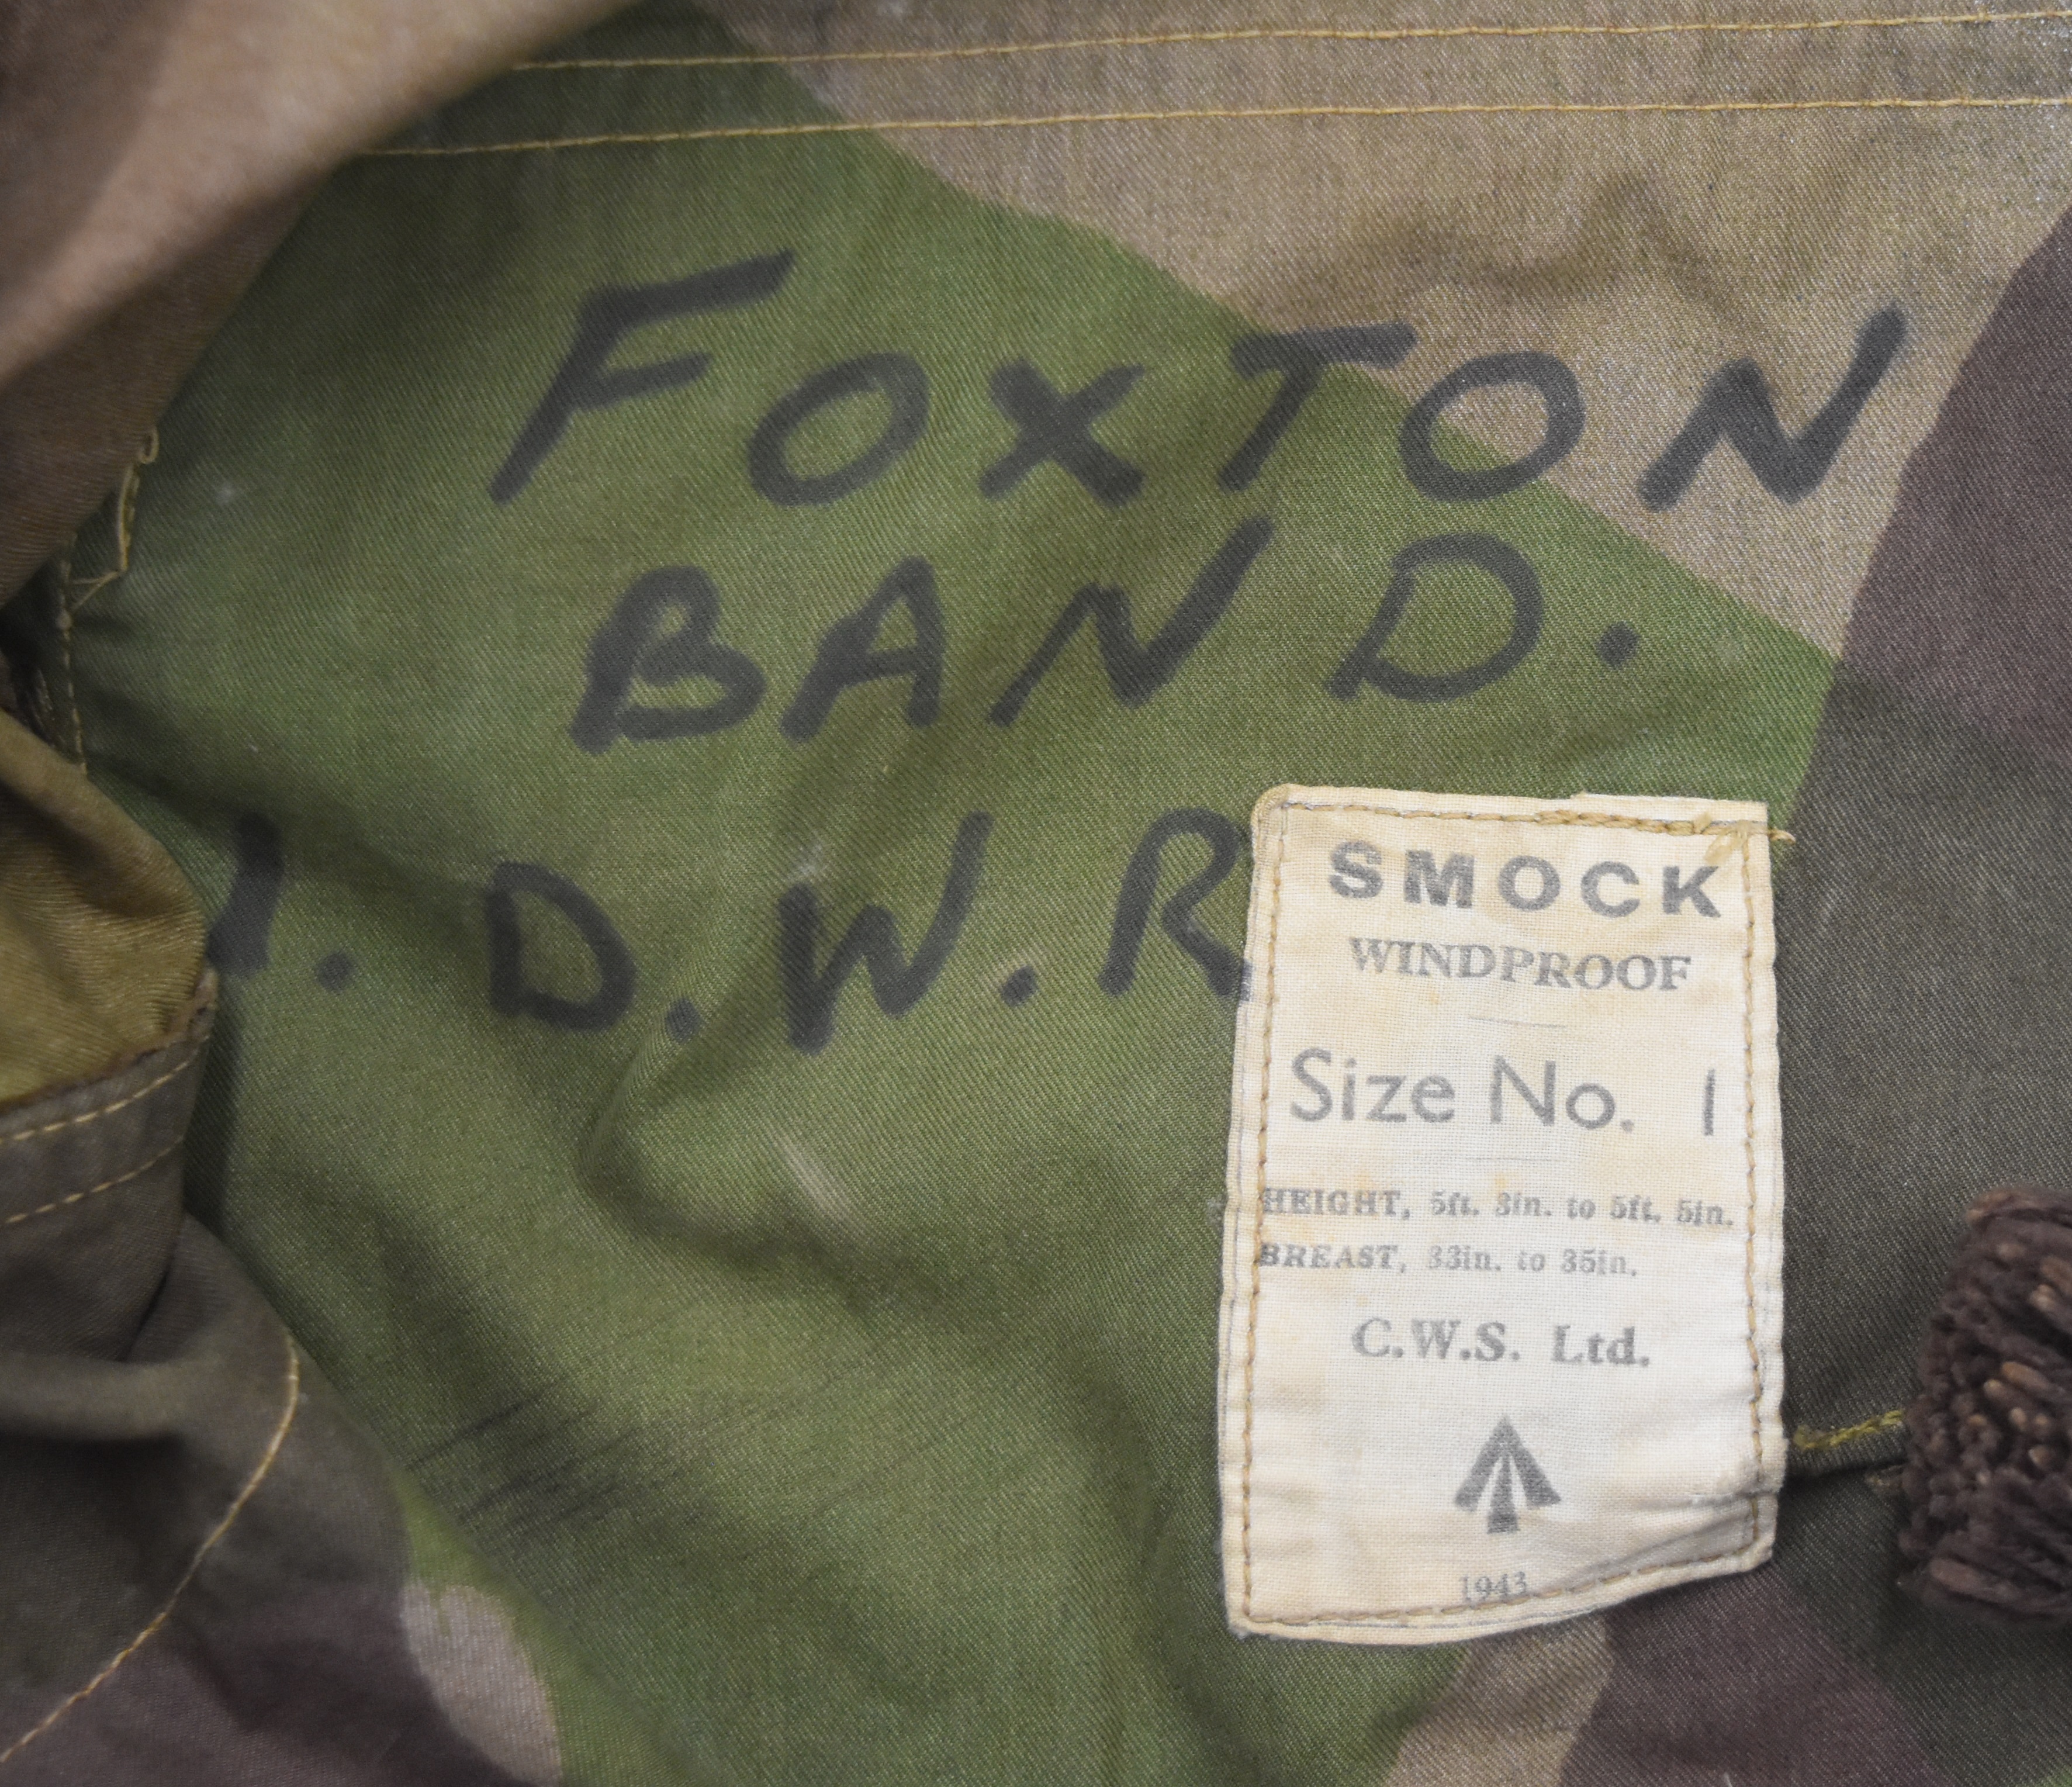 British WW2 SAS windproof camouflage smock with two breast and two lower pockets, integrated hood, - Image 3 of 4